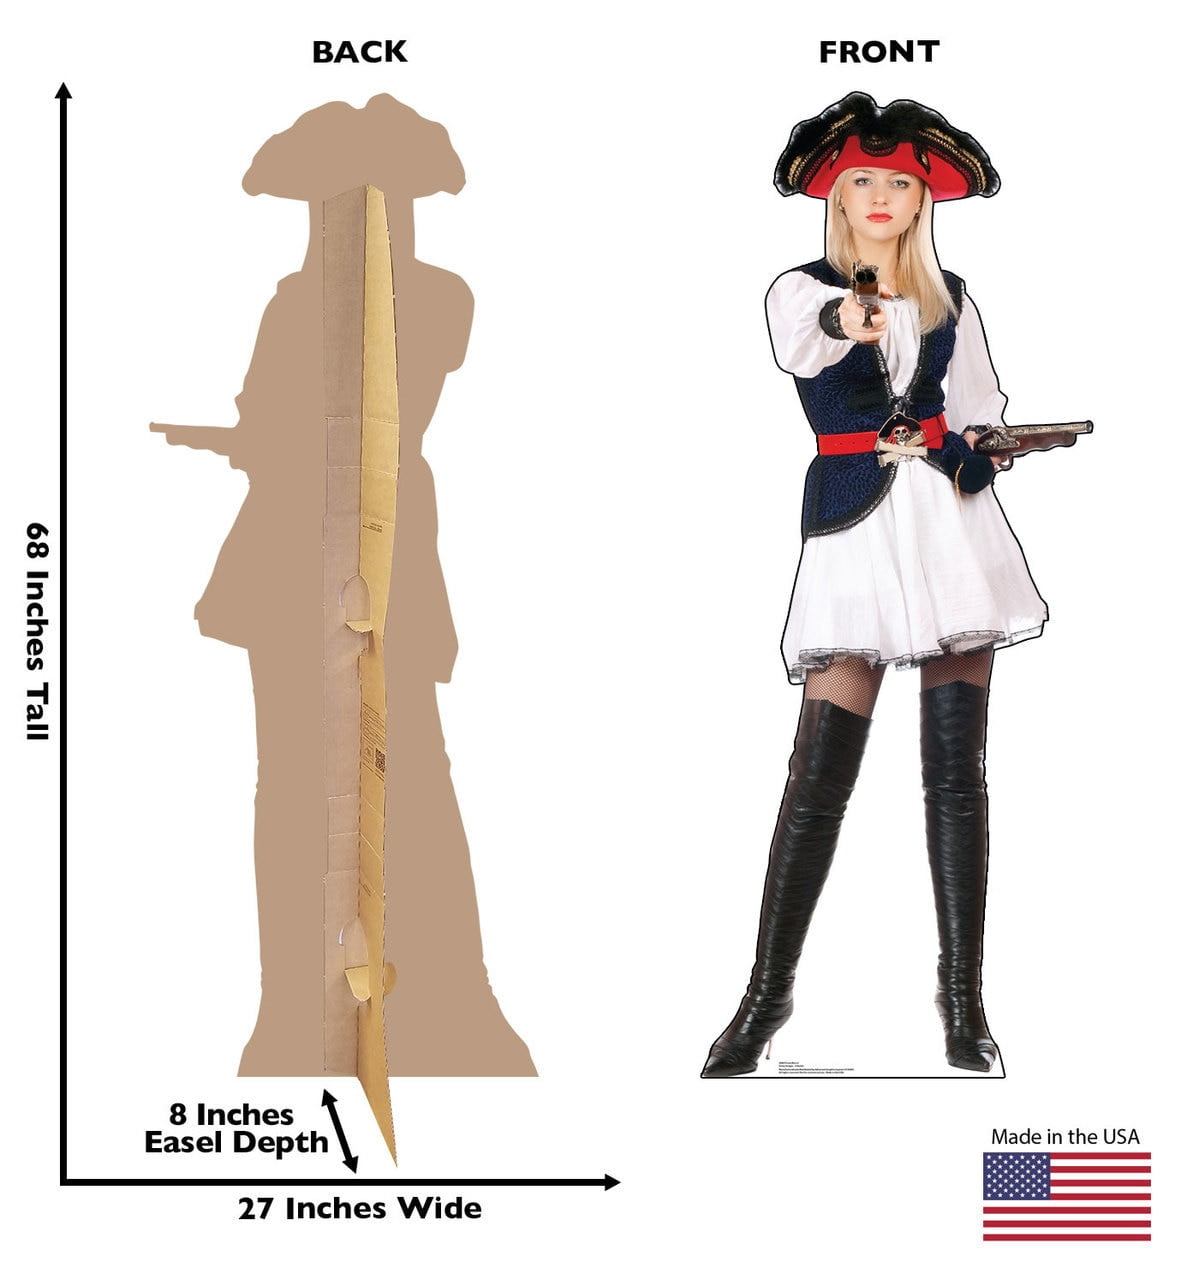 2686 68 X 27 In. Pirate Wench Wall Decal